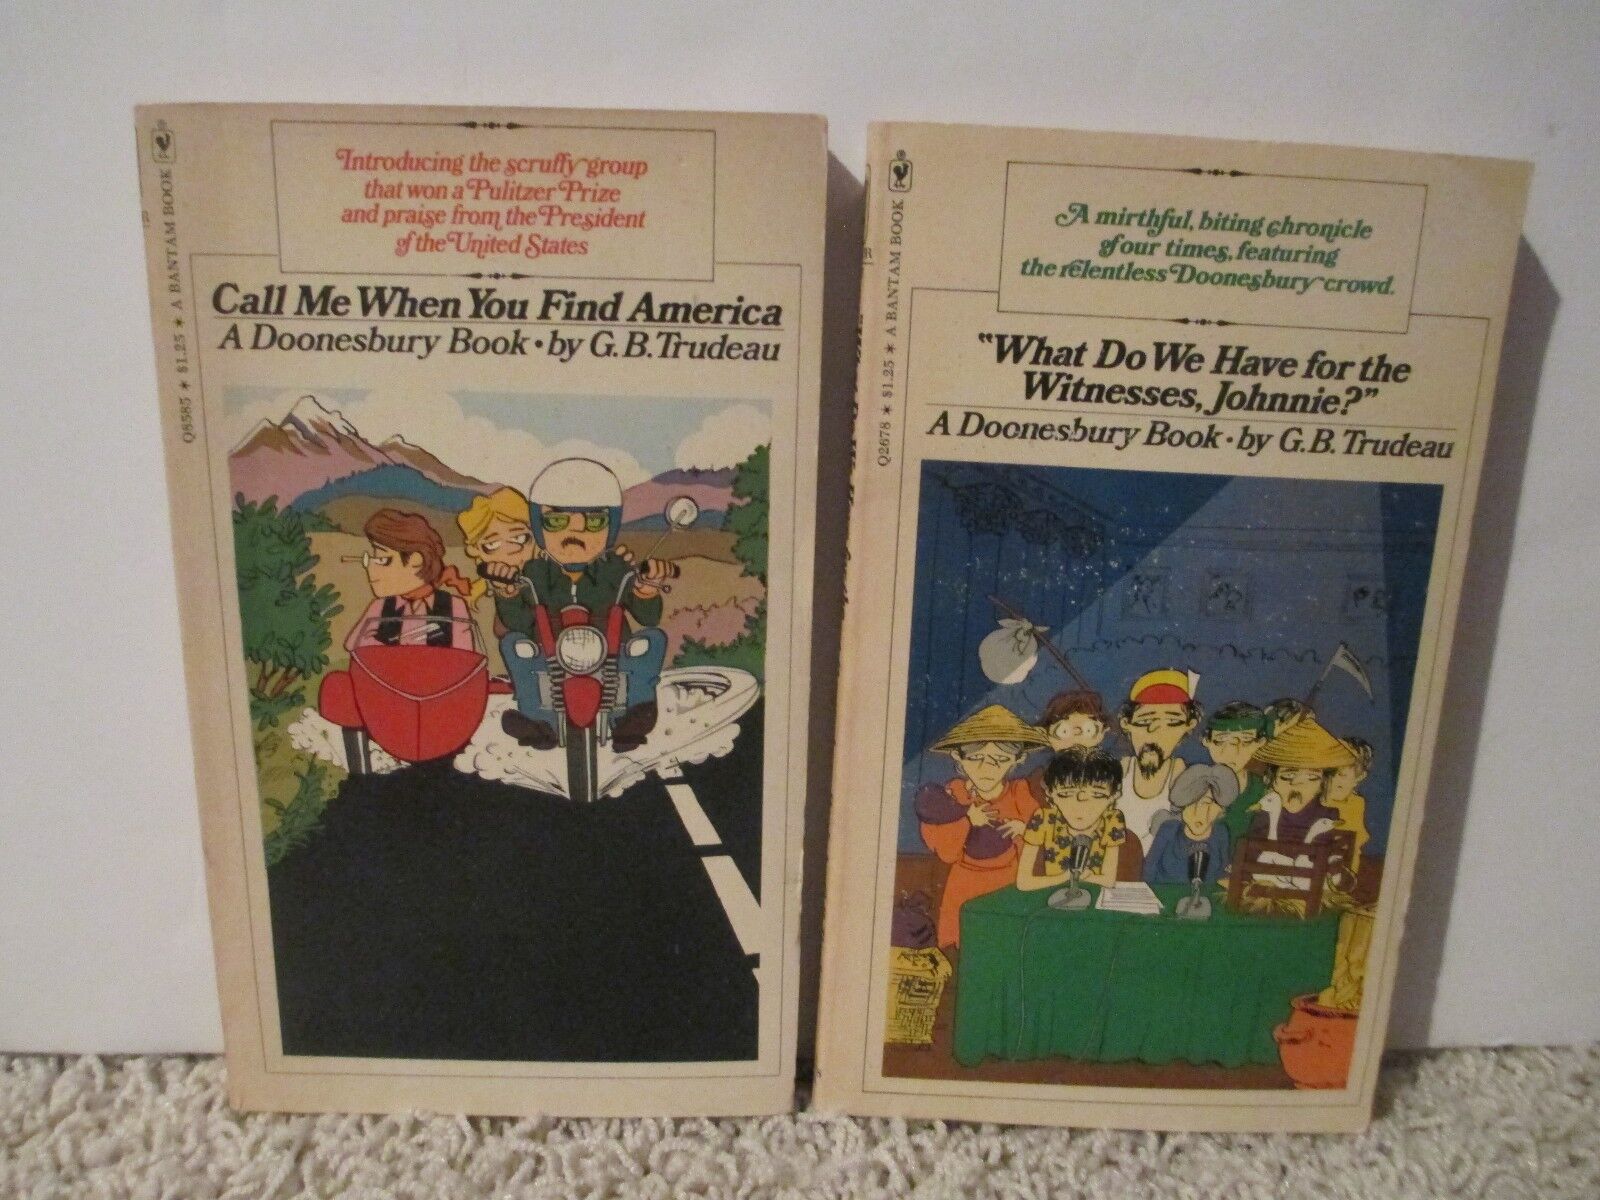 1973 & 1975 Vintage Set of 2 Doonesbury Comic Books by G.B. Trudeau - see ad for